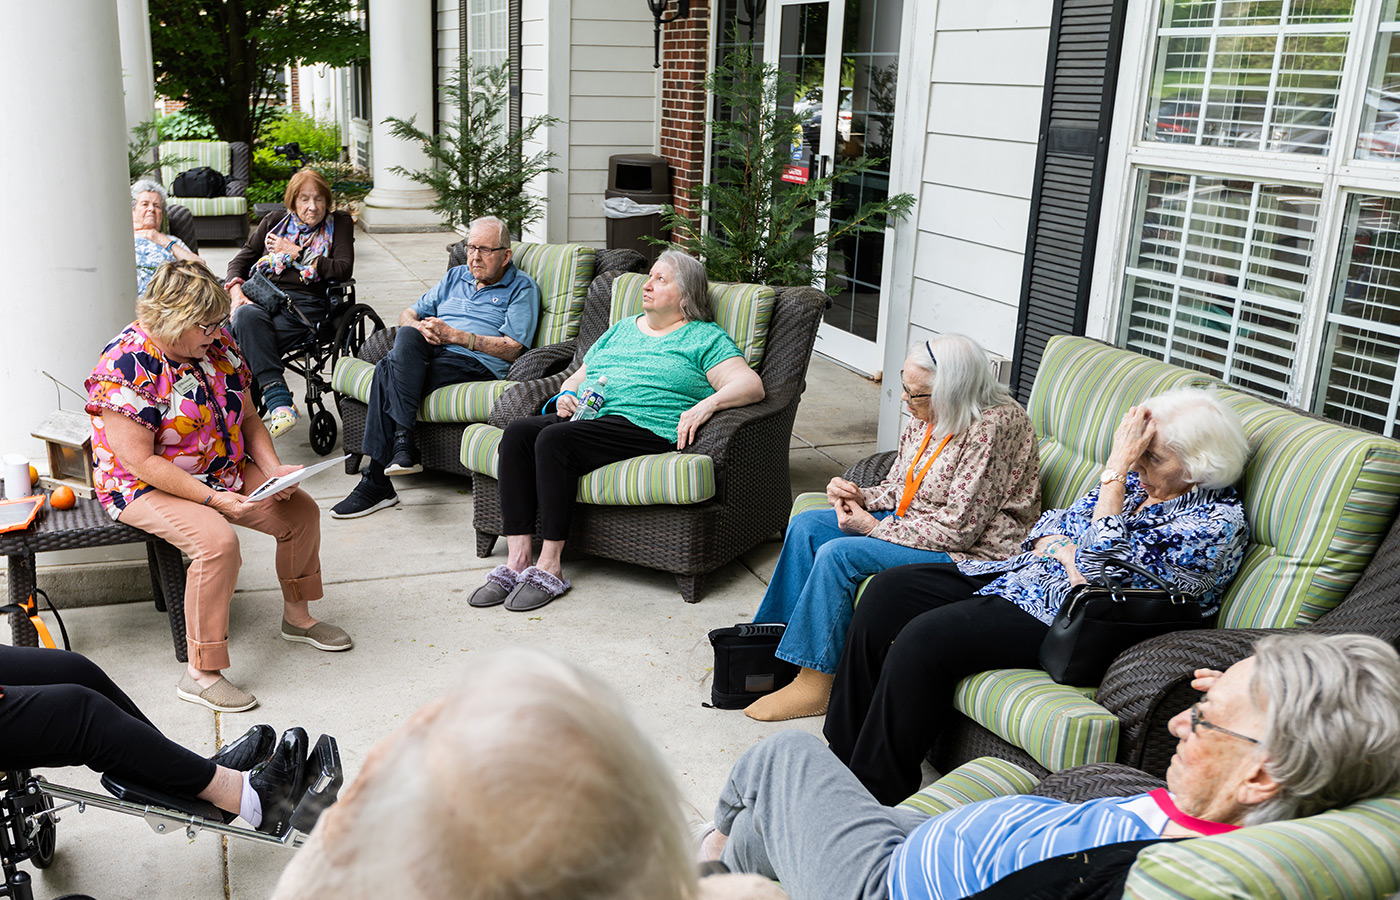 A group activity on the front porch.